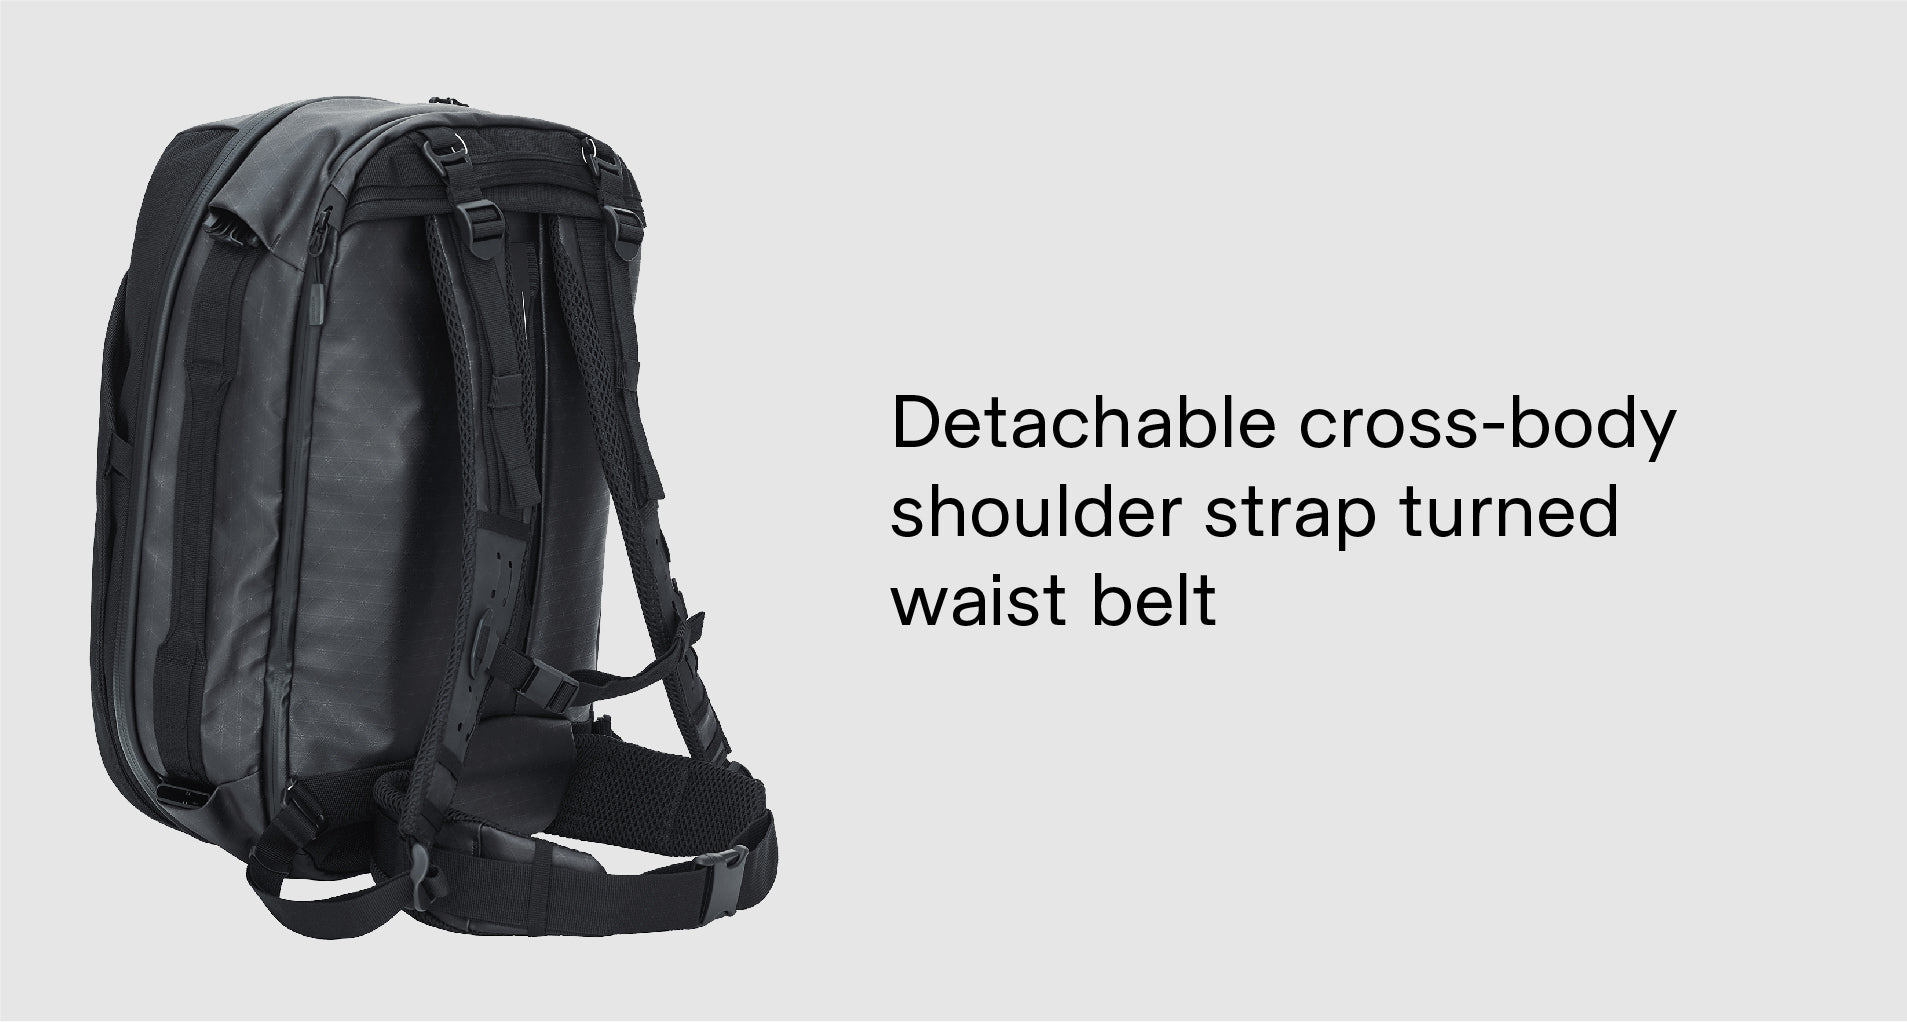 The RIKR 38L Duffle Backpack with detachable cross-body shoulder strap turned waist belt